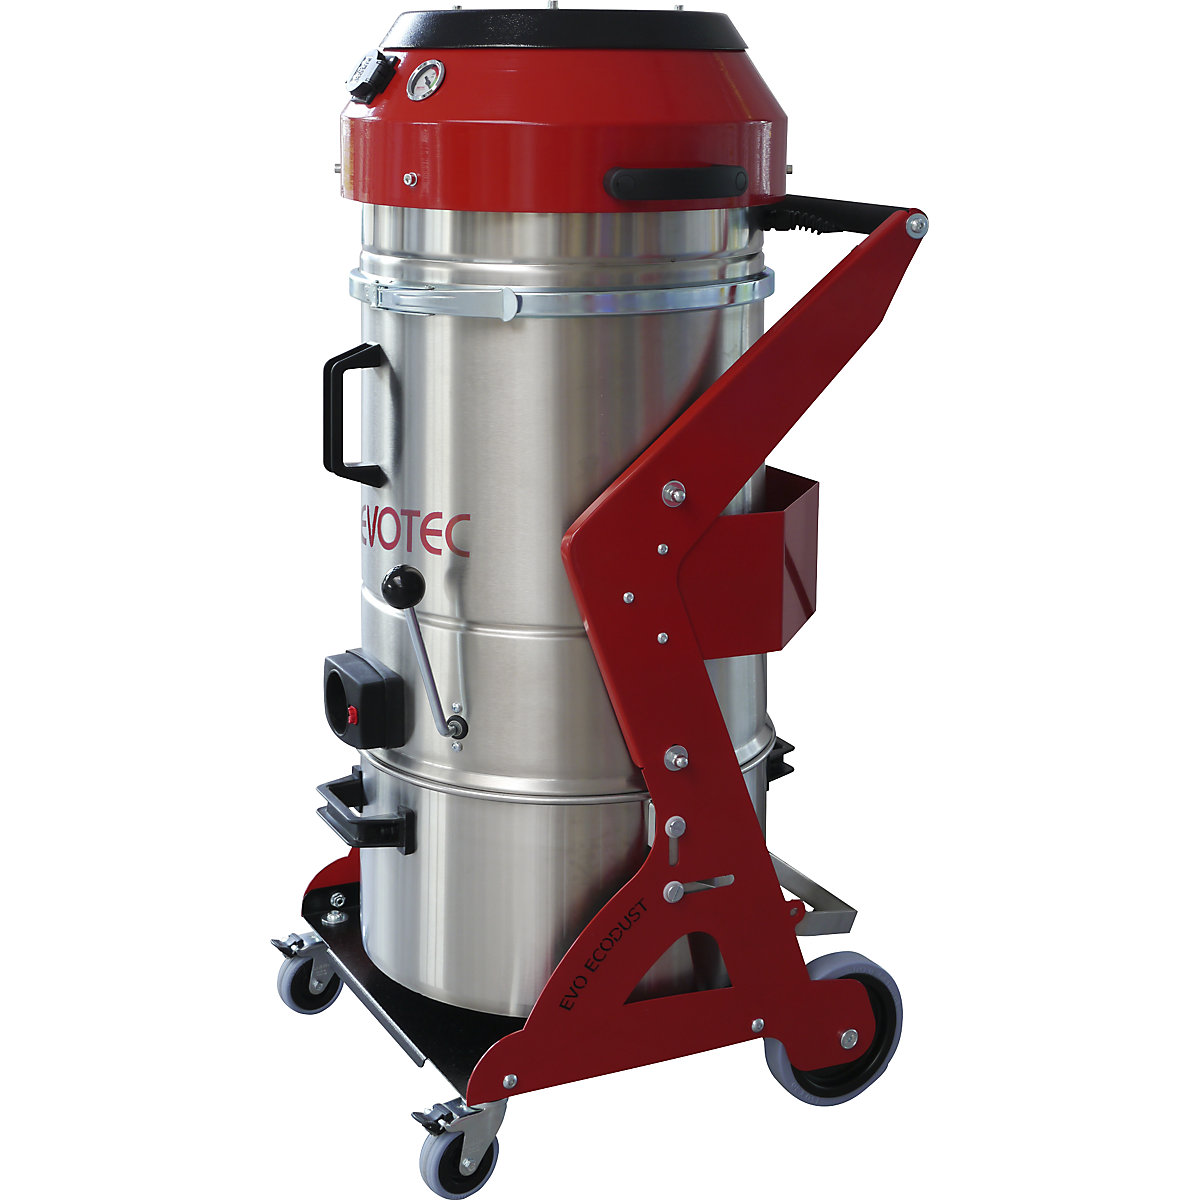 Safety industrial vacuum cleaner